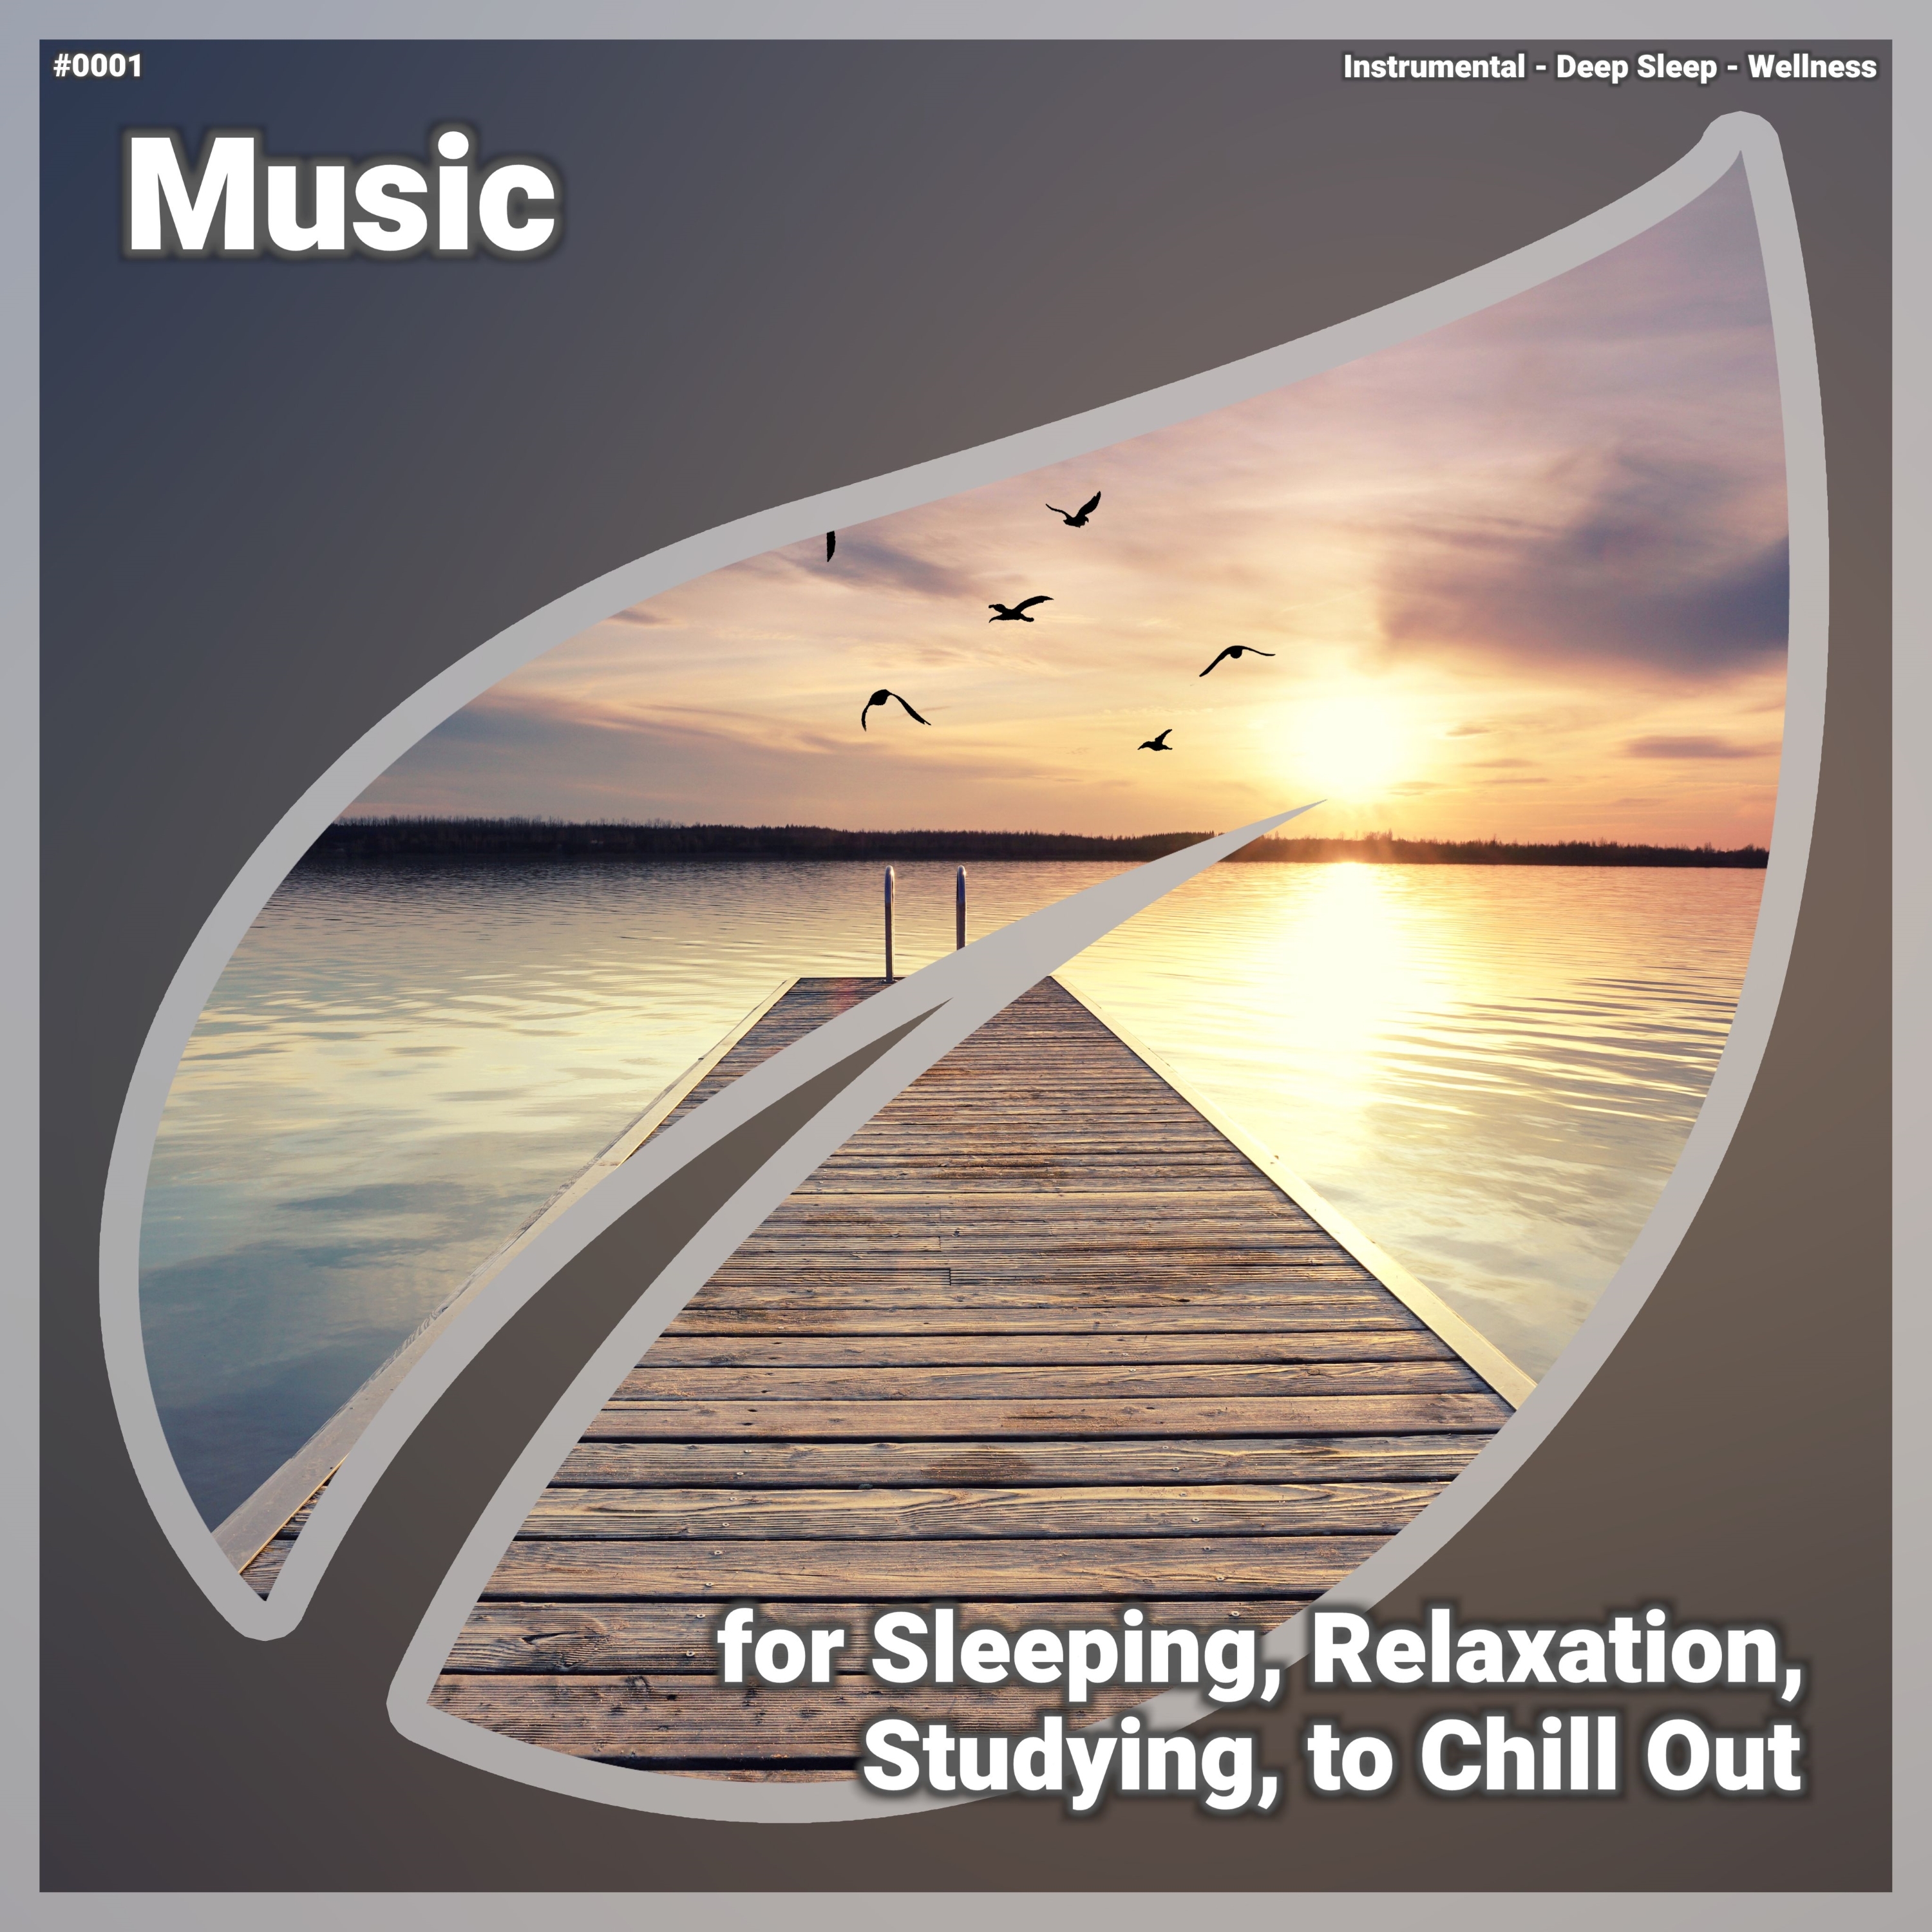 I-download Relaxing Music, Pt. 16